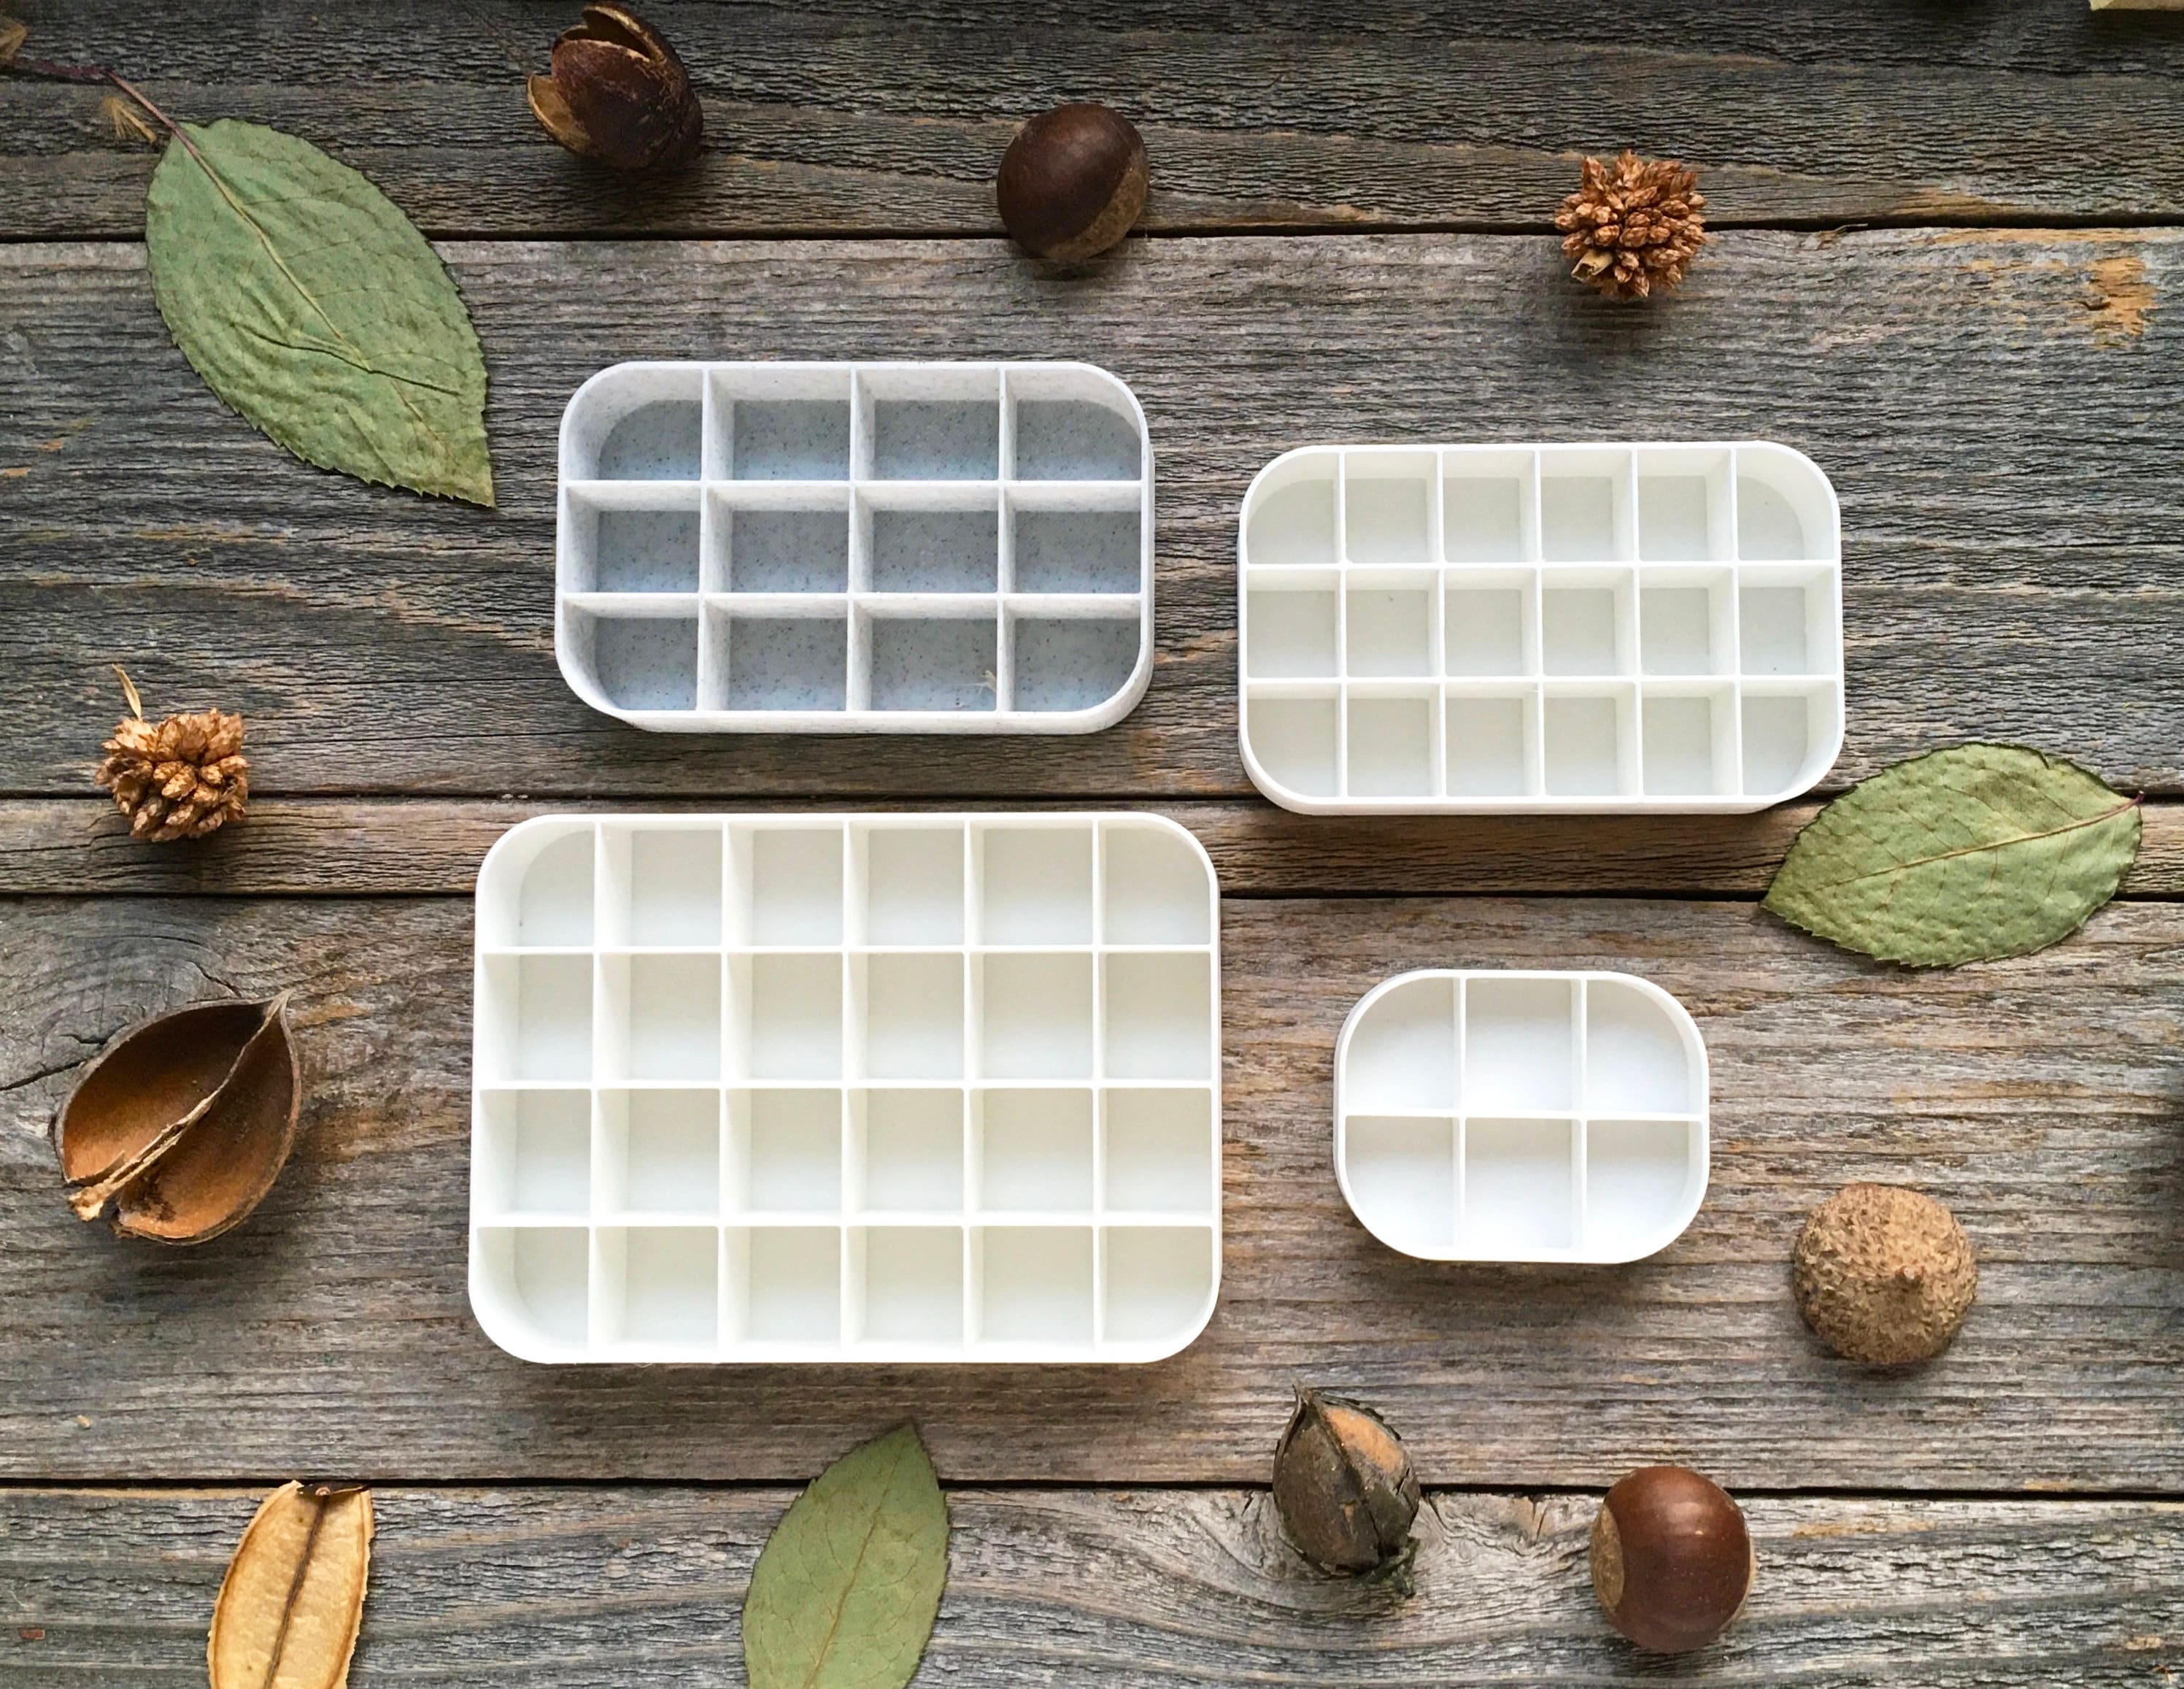 W&P Peak Silicone Everyday Ice Tray Review